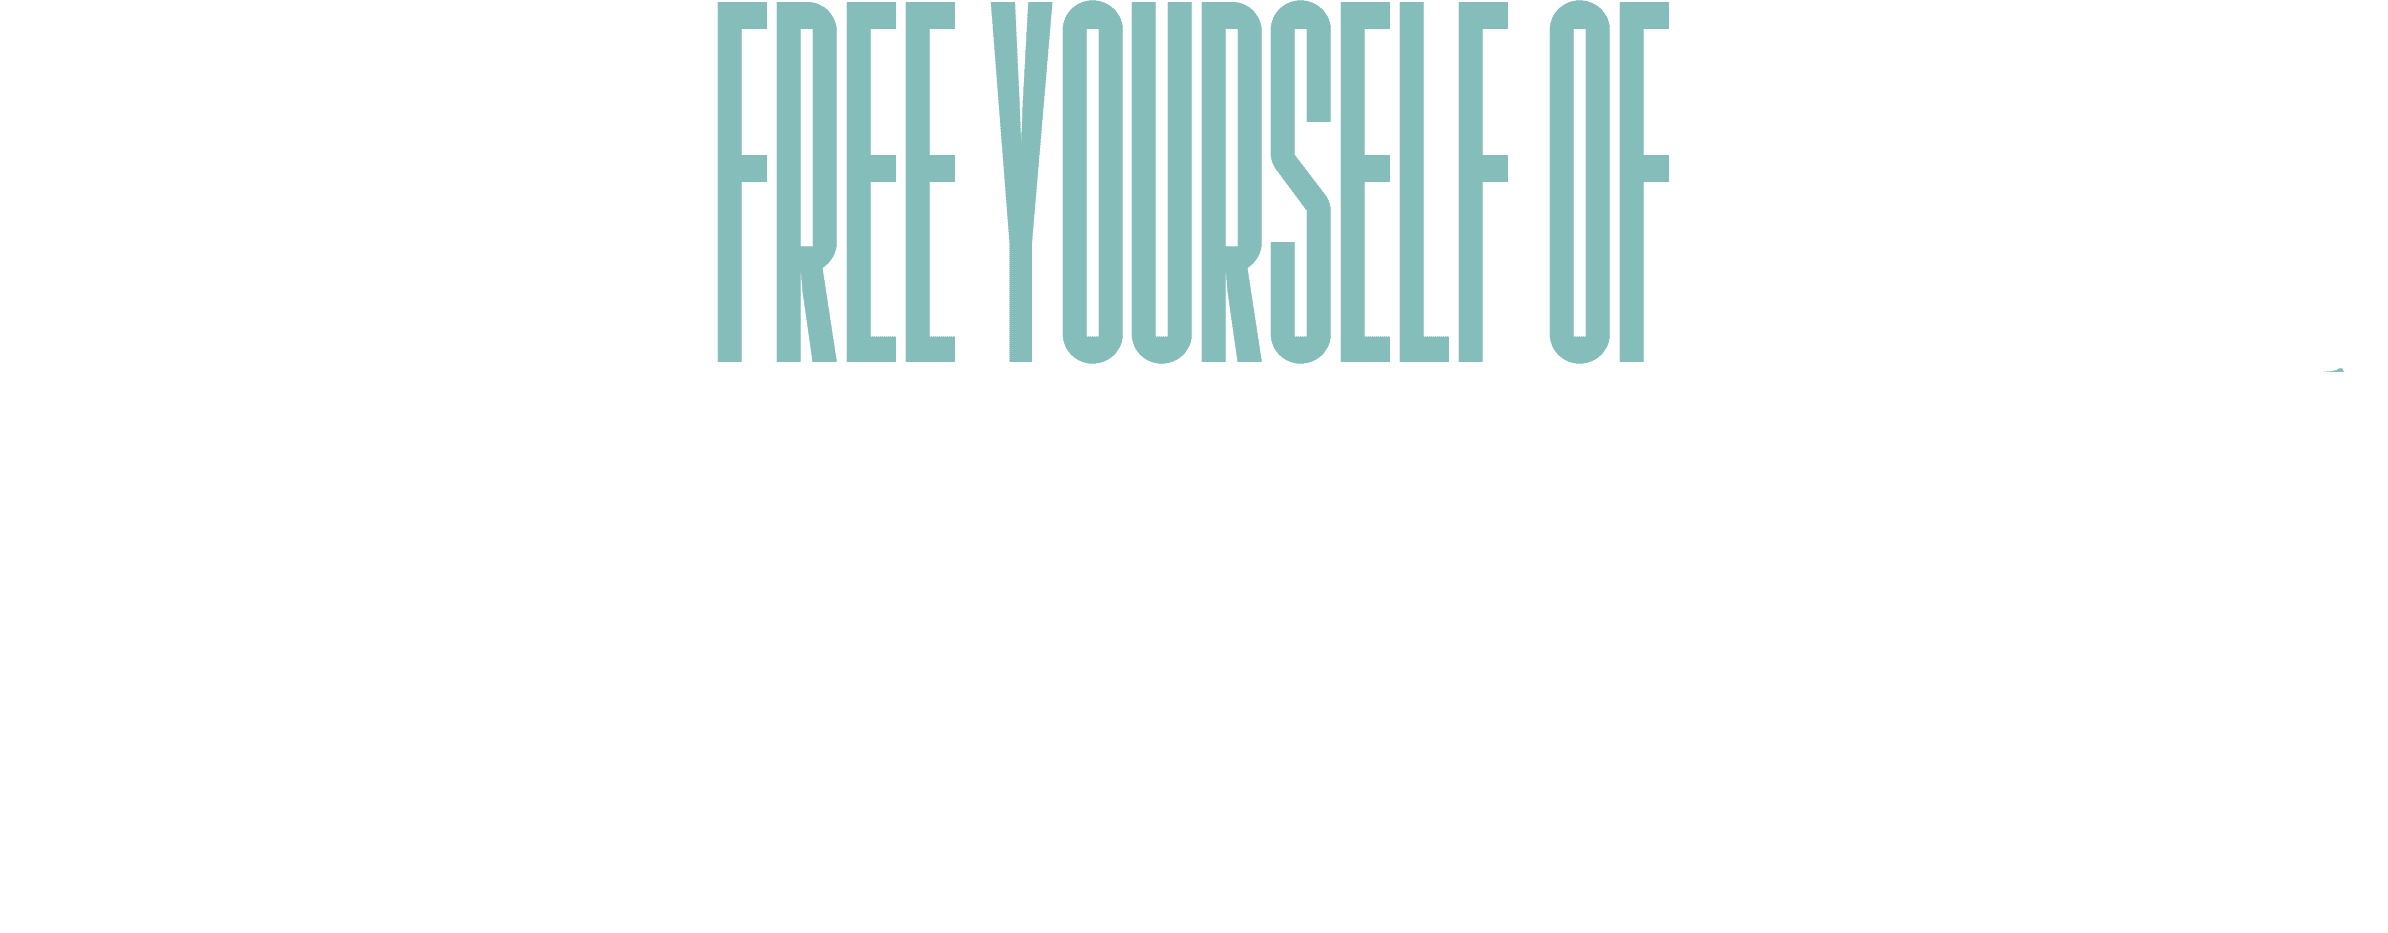 FREE YOURSELF OF